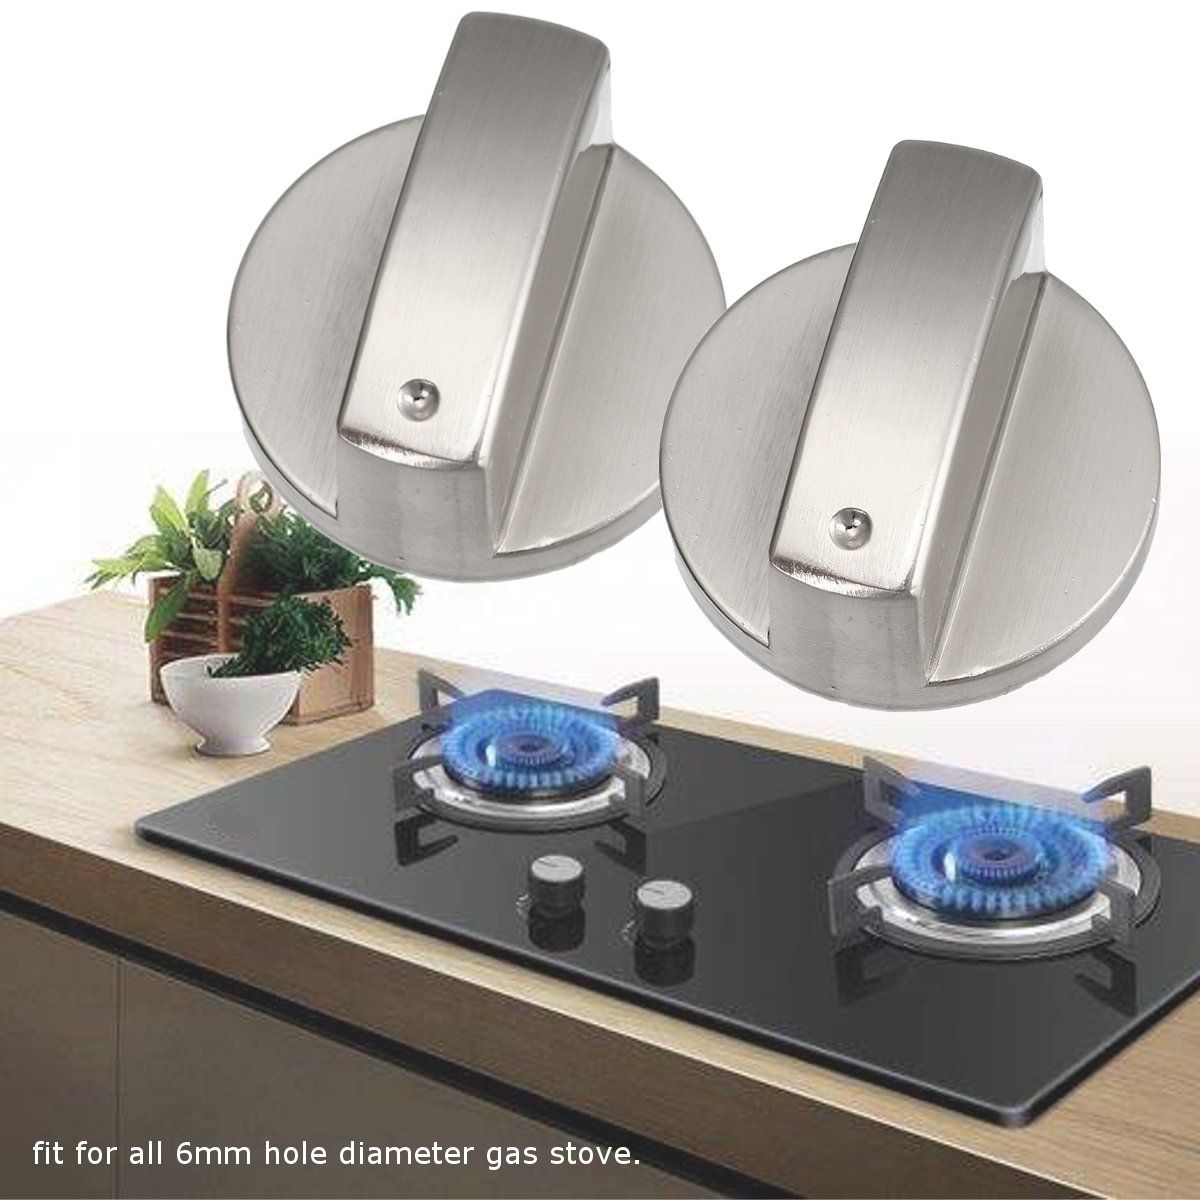 2PCSPACK-6mm-Gas-Stove-Knobs-Cooker-Oven-Cooktop-Metal-Switch-Control-Kitchen-1581159